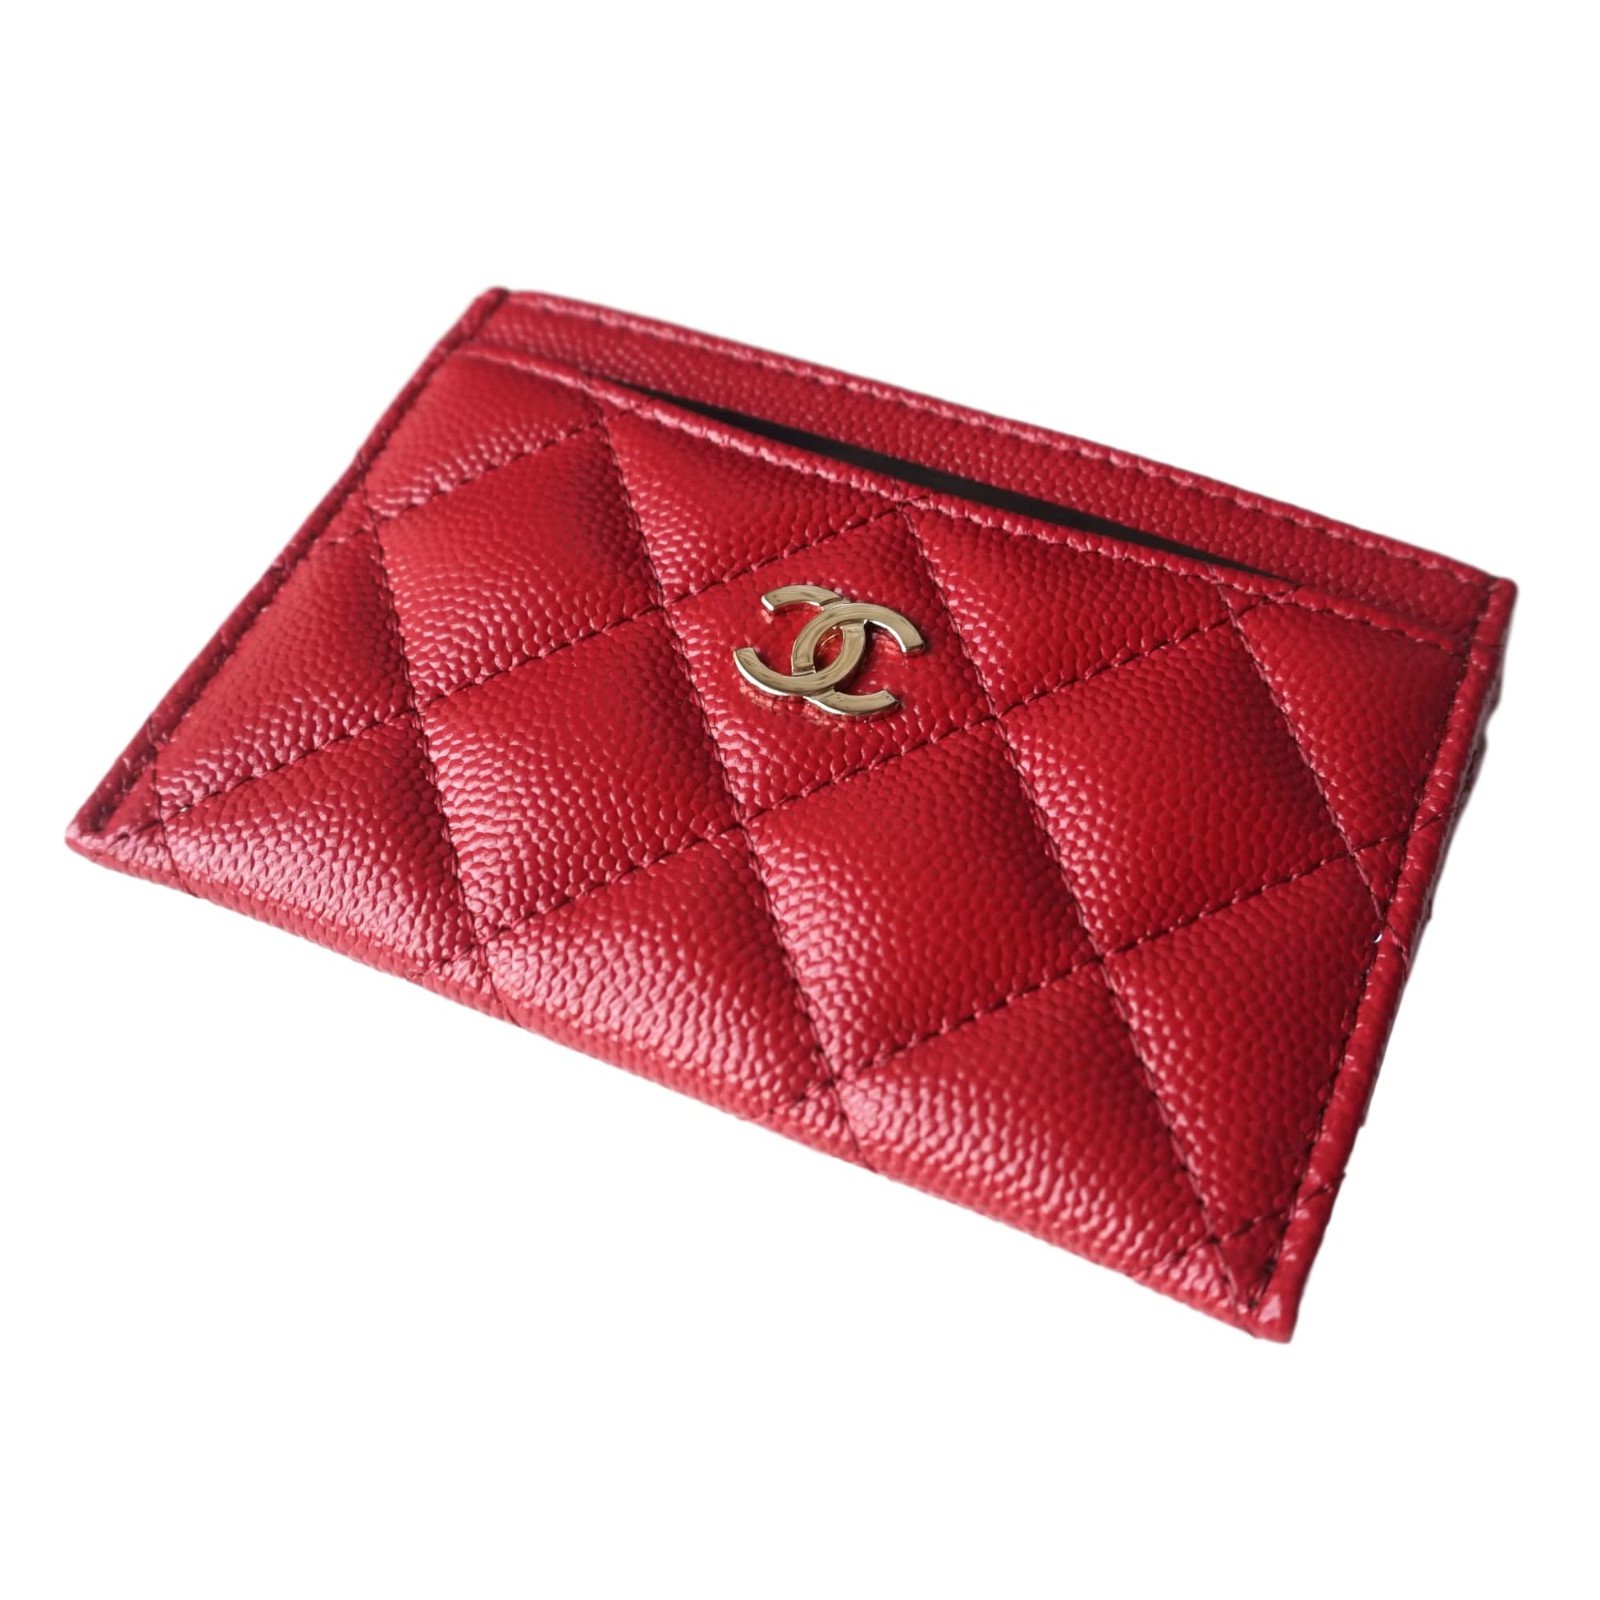 classic chanel red wallet